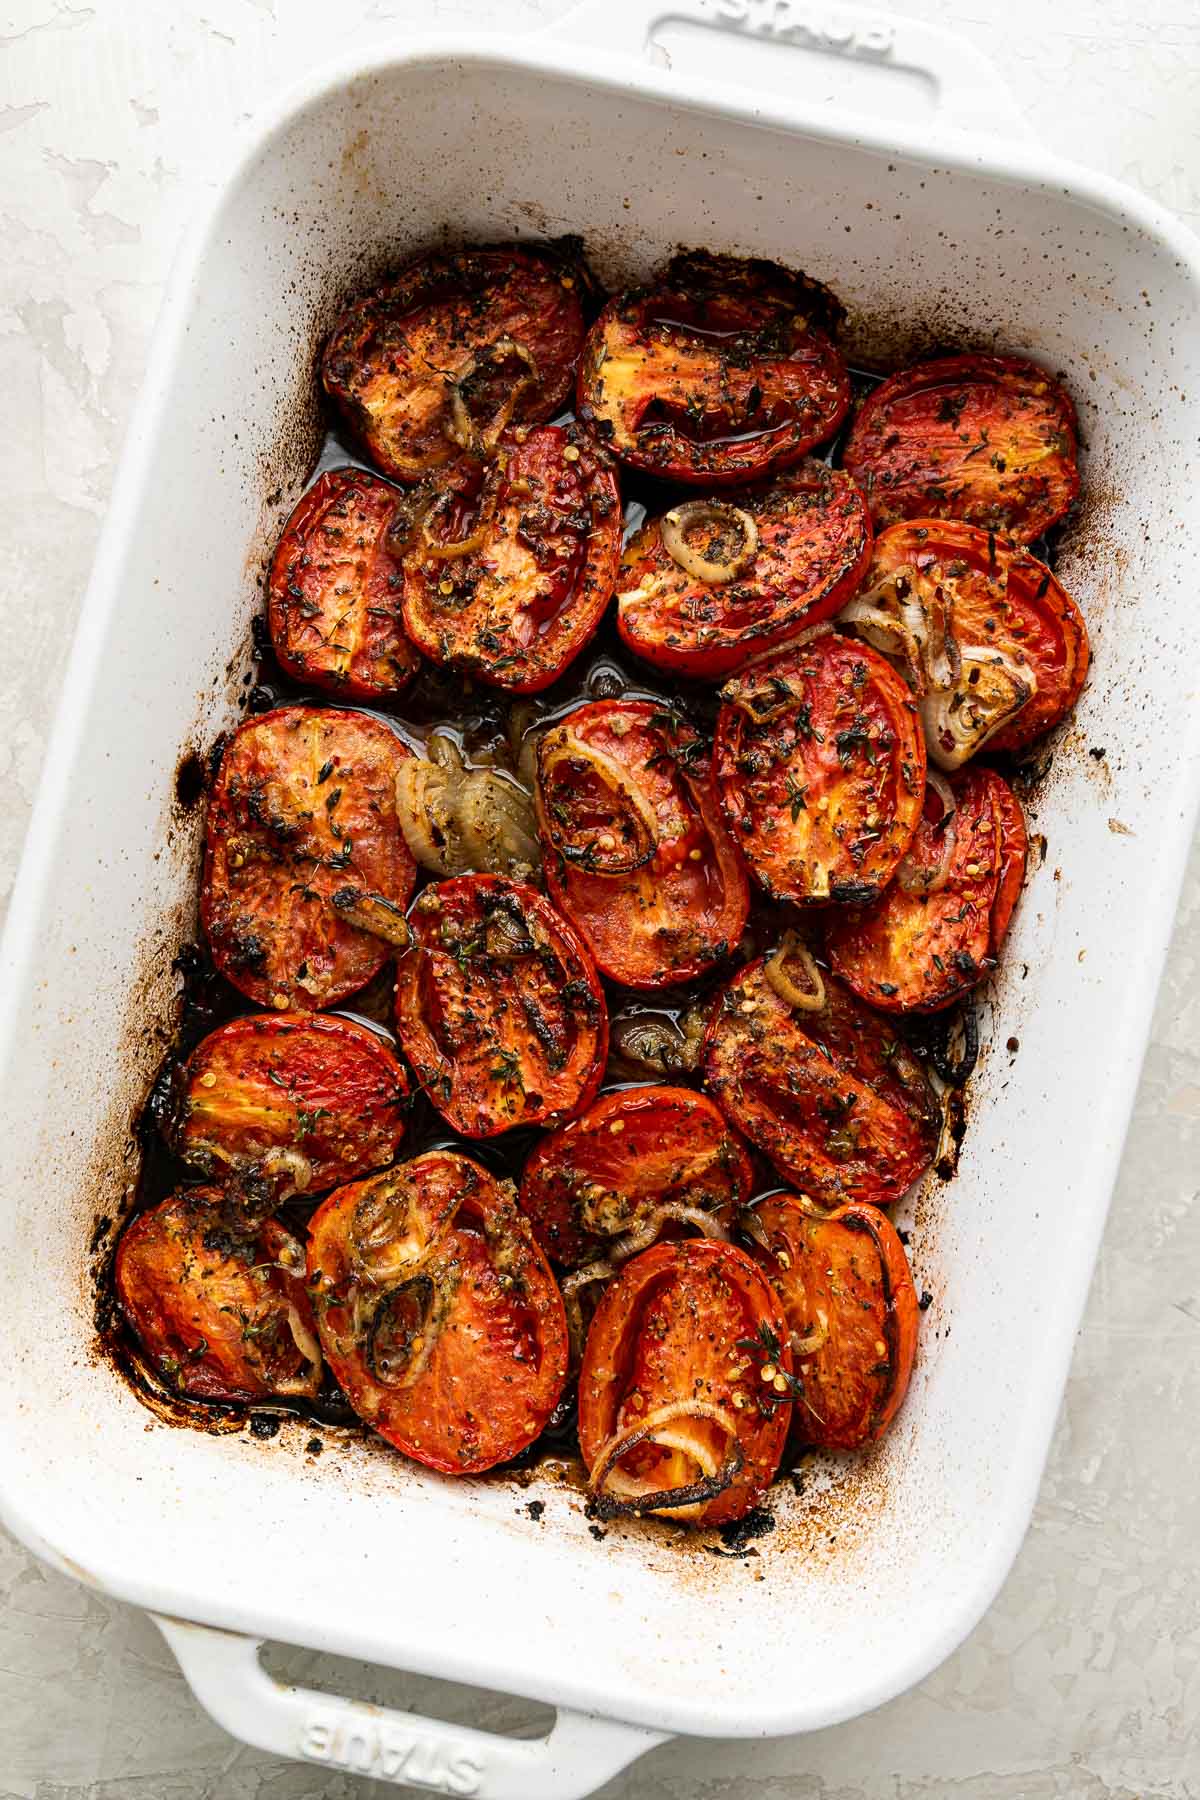 Oven roasted roma tomatoes, shallots, & garlic in a white Staub baking dish. The dish sits atop a creamy white surface.